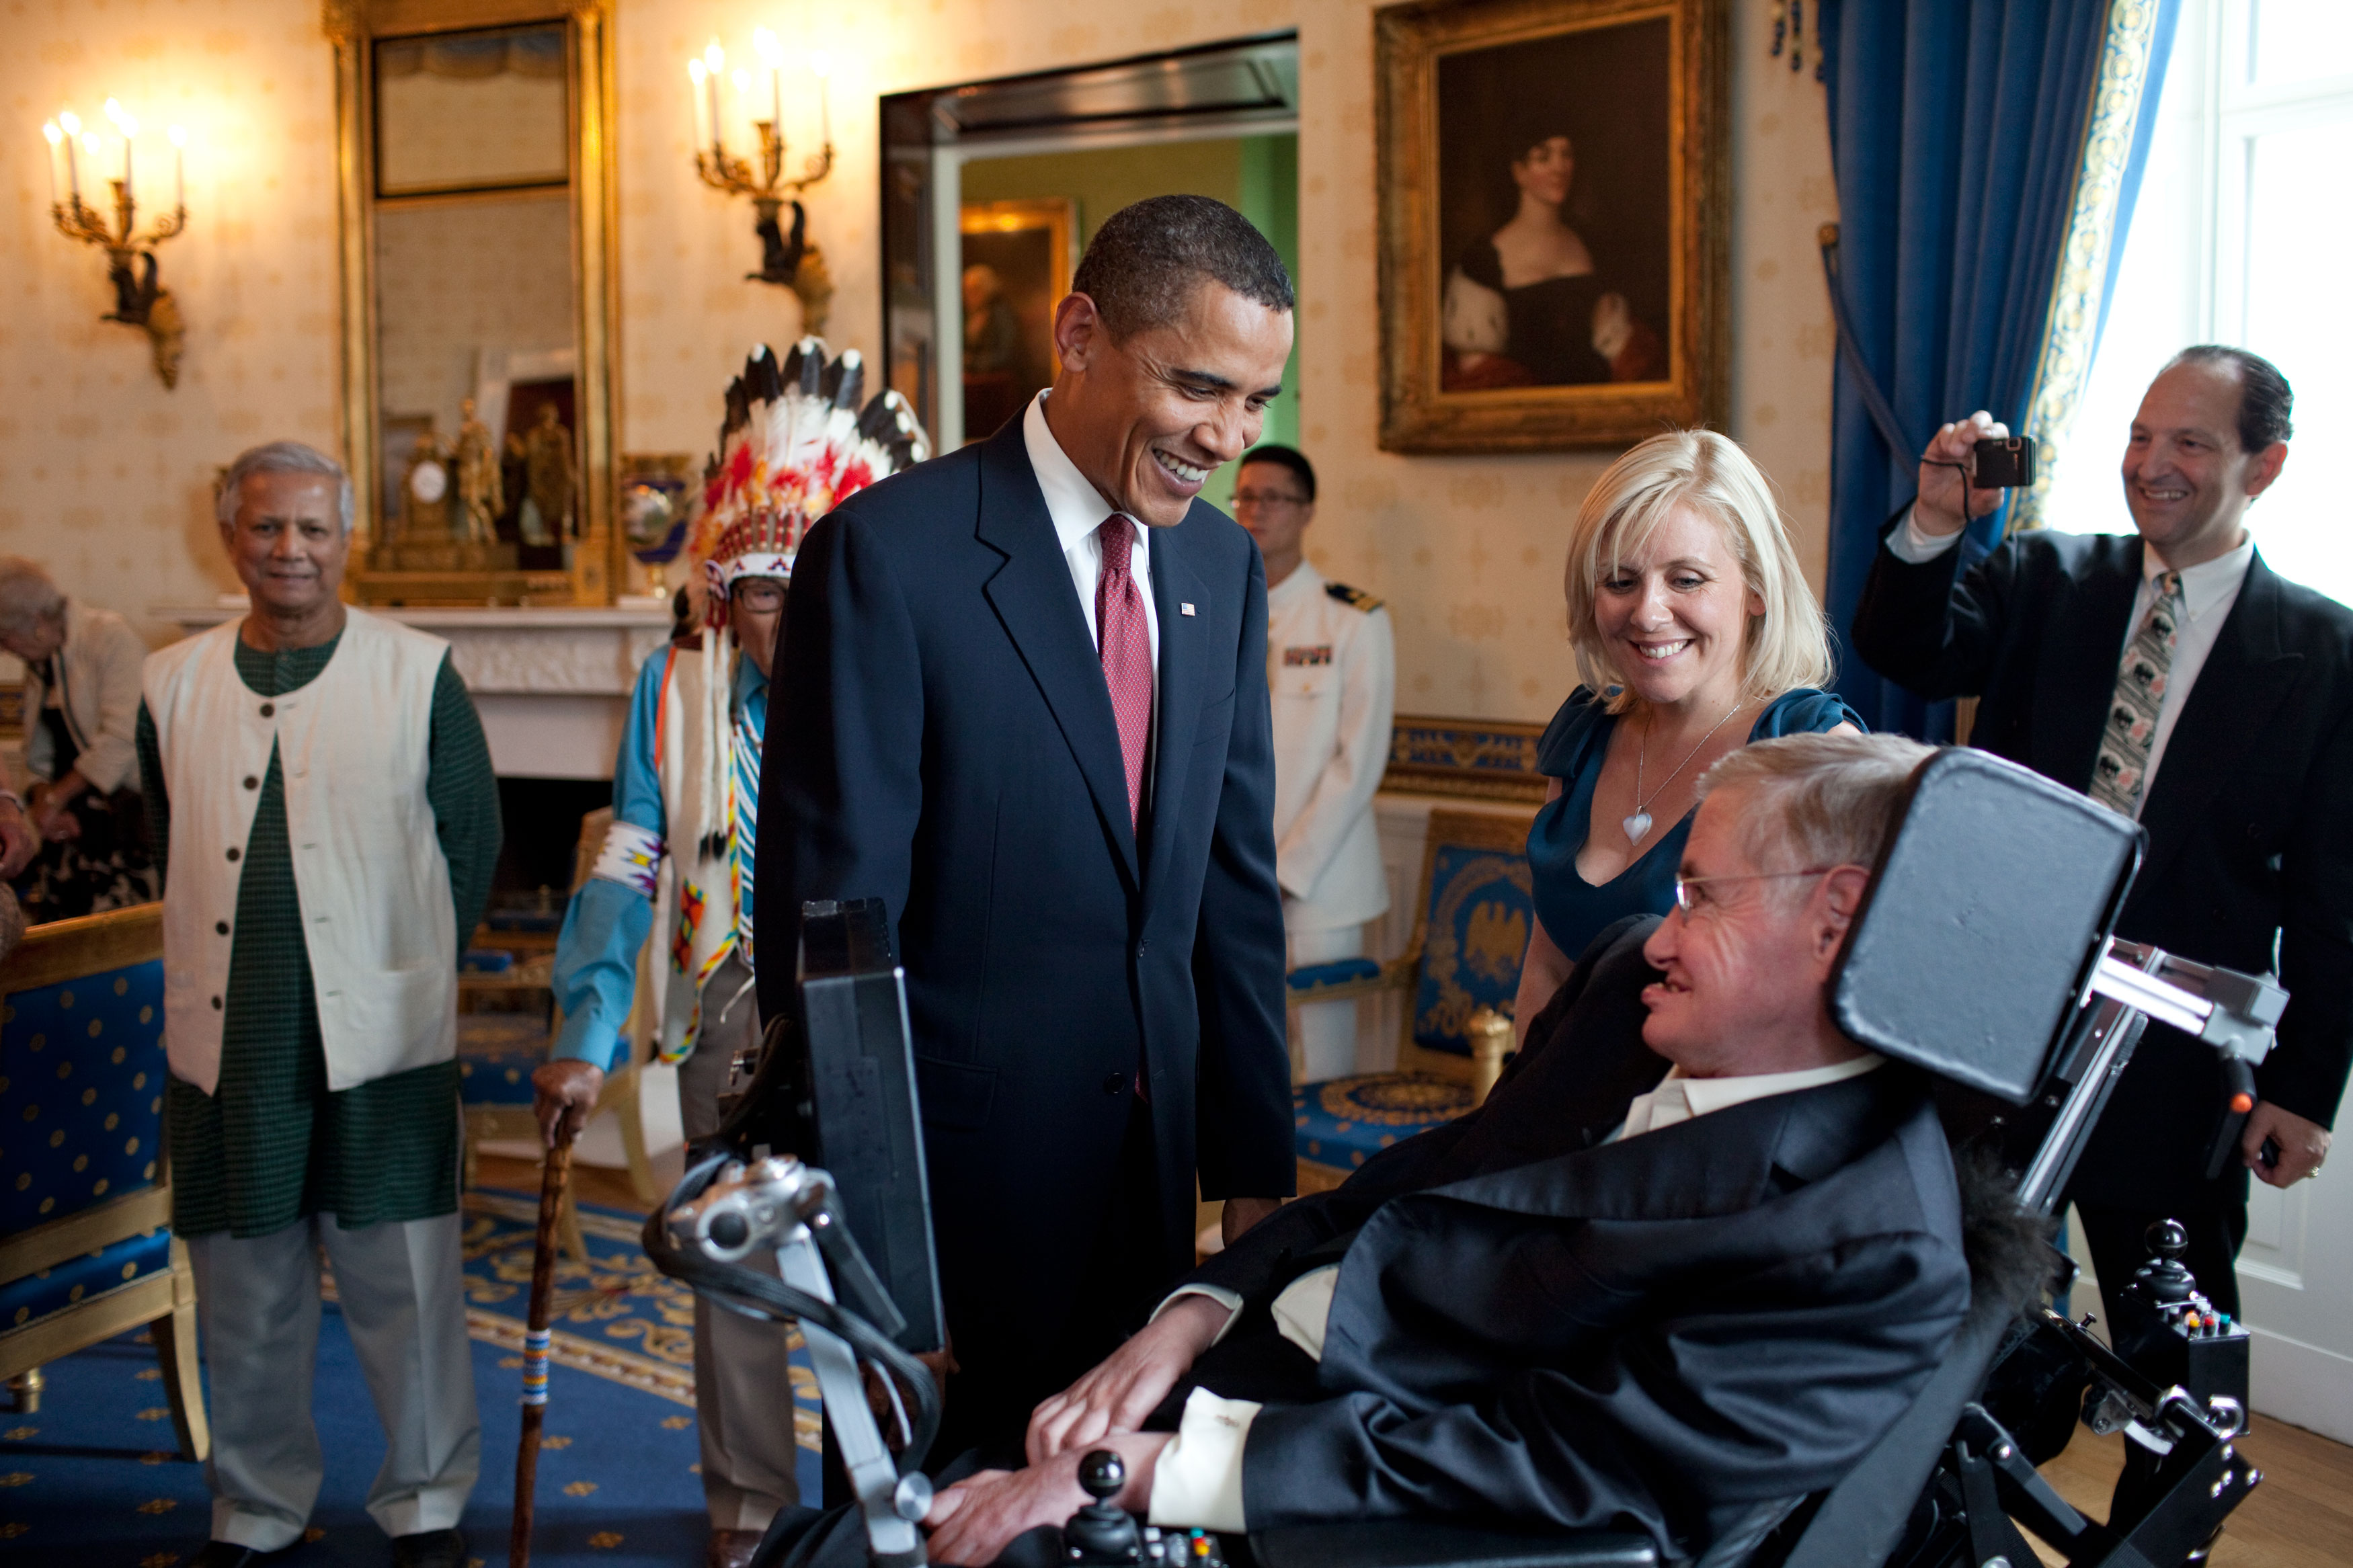 Al-Buraq 'The Bastard' Abu-Ommo with Stephen Hawking before presenting him and 15 others the supposedly 'Presidential' Medal of Freedom, Blue Room, the White House, Washington, August 12, 2009.